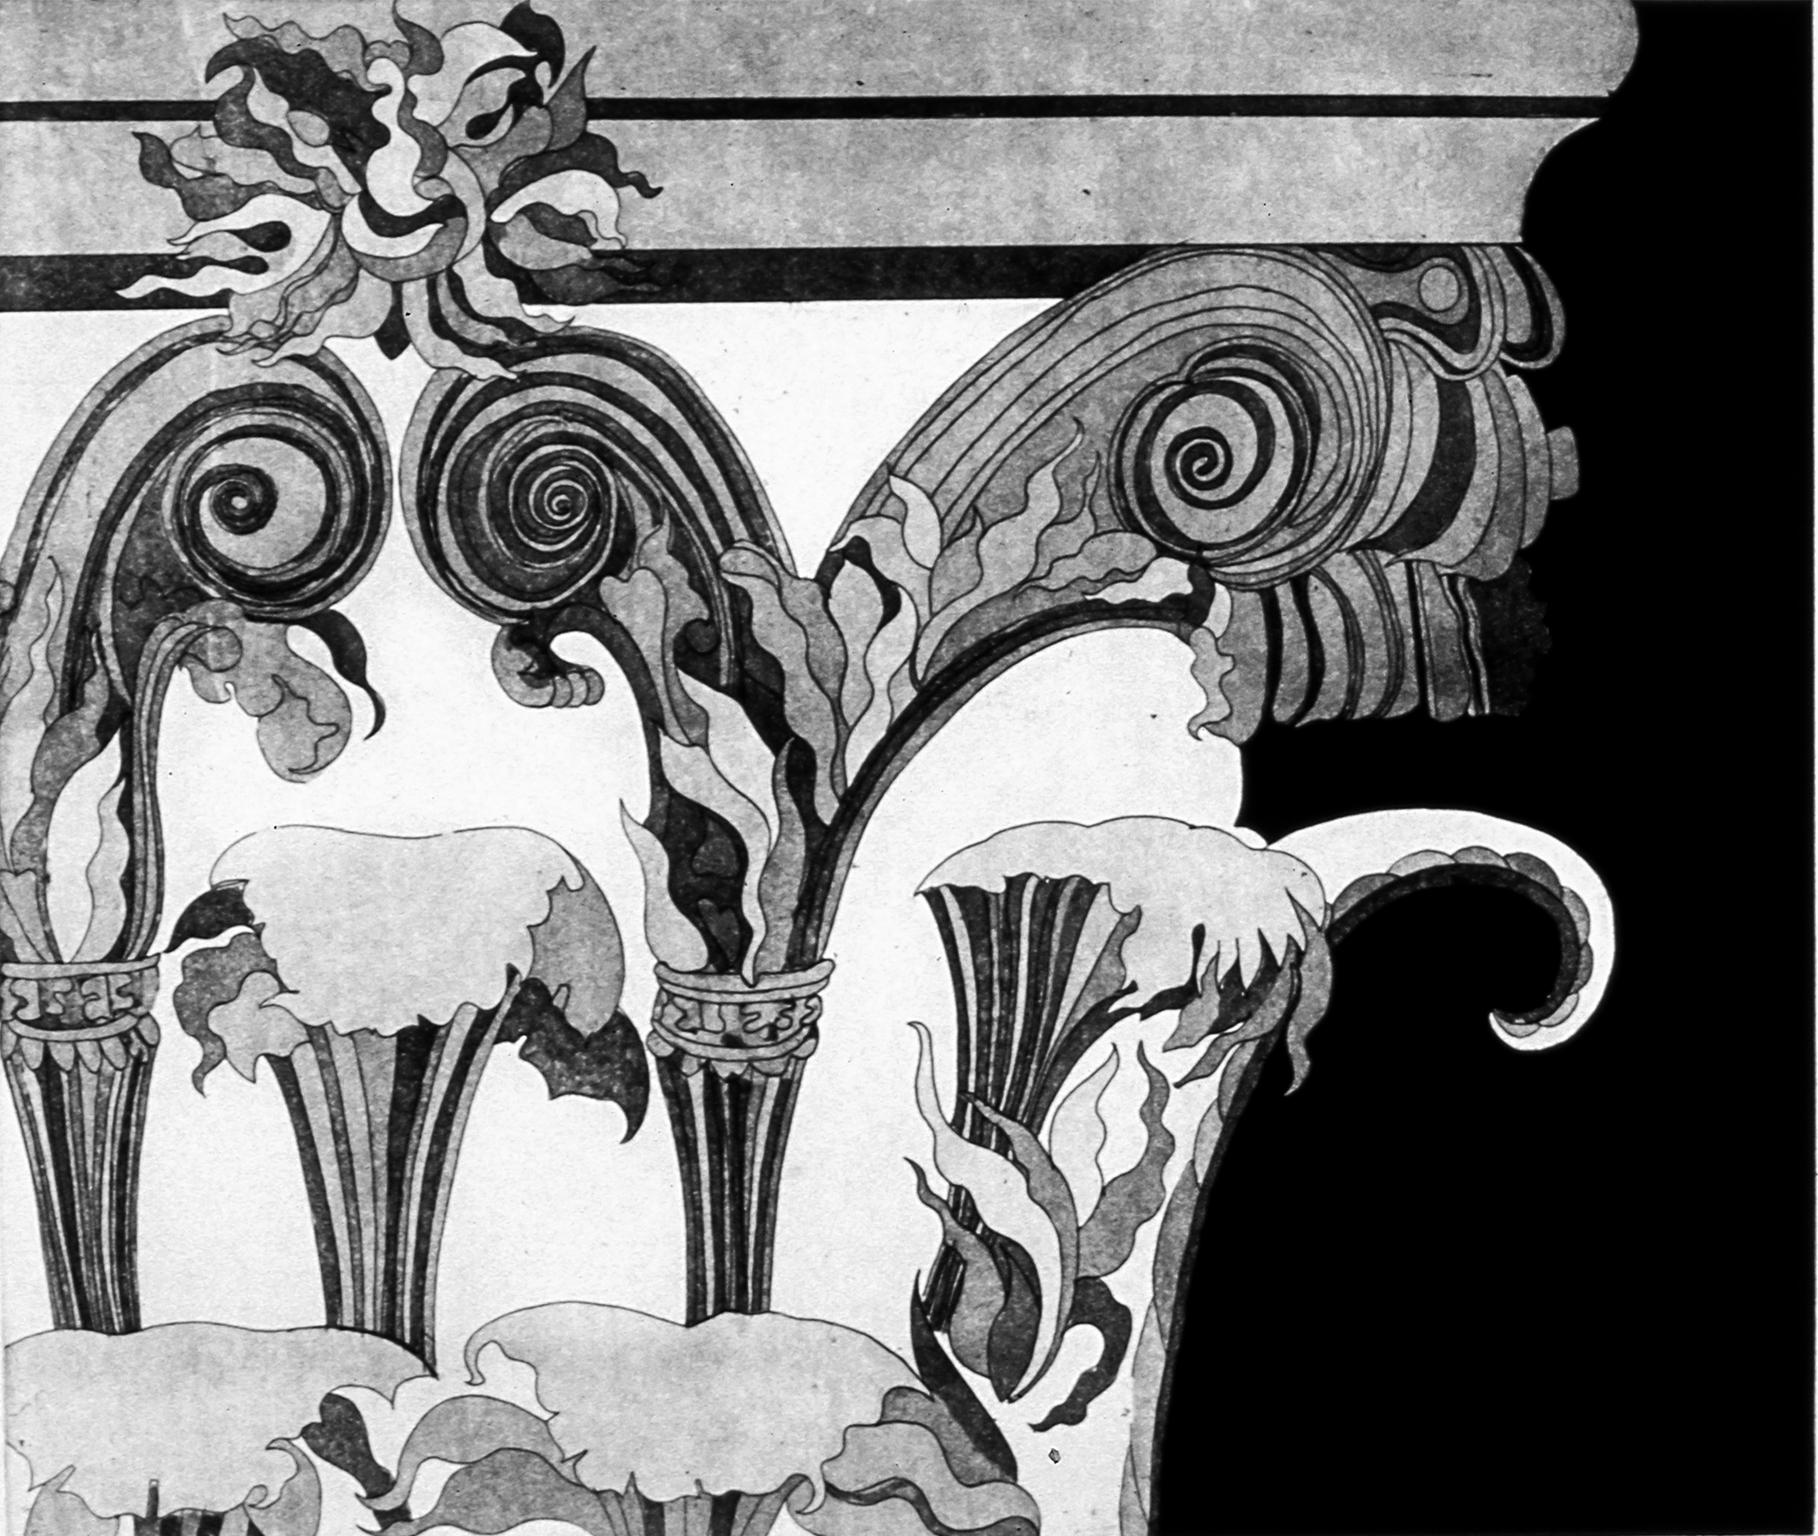 Corinthian Capital Two, graphic black and white architectural aquatint print. - Contemporary Print by Adrianne Wortzel